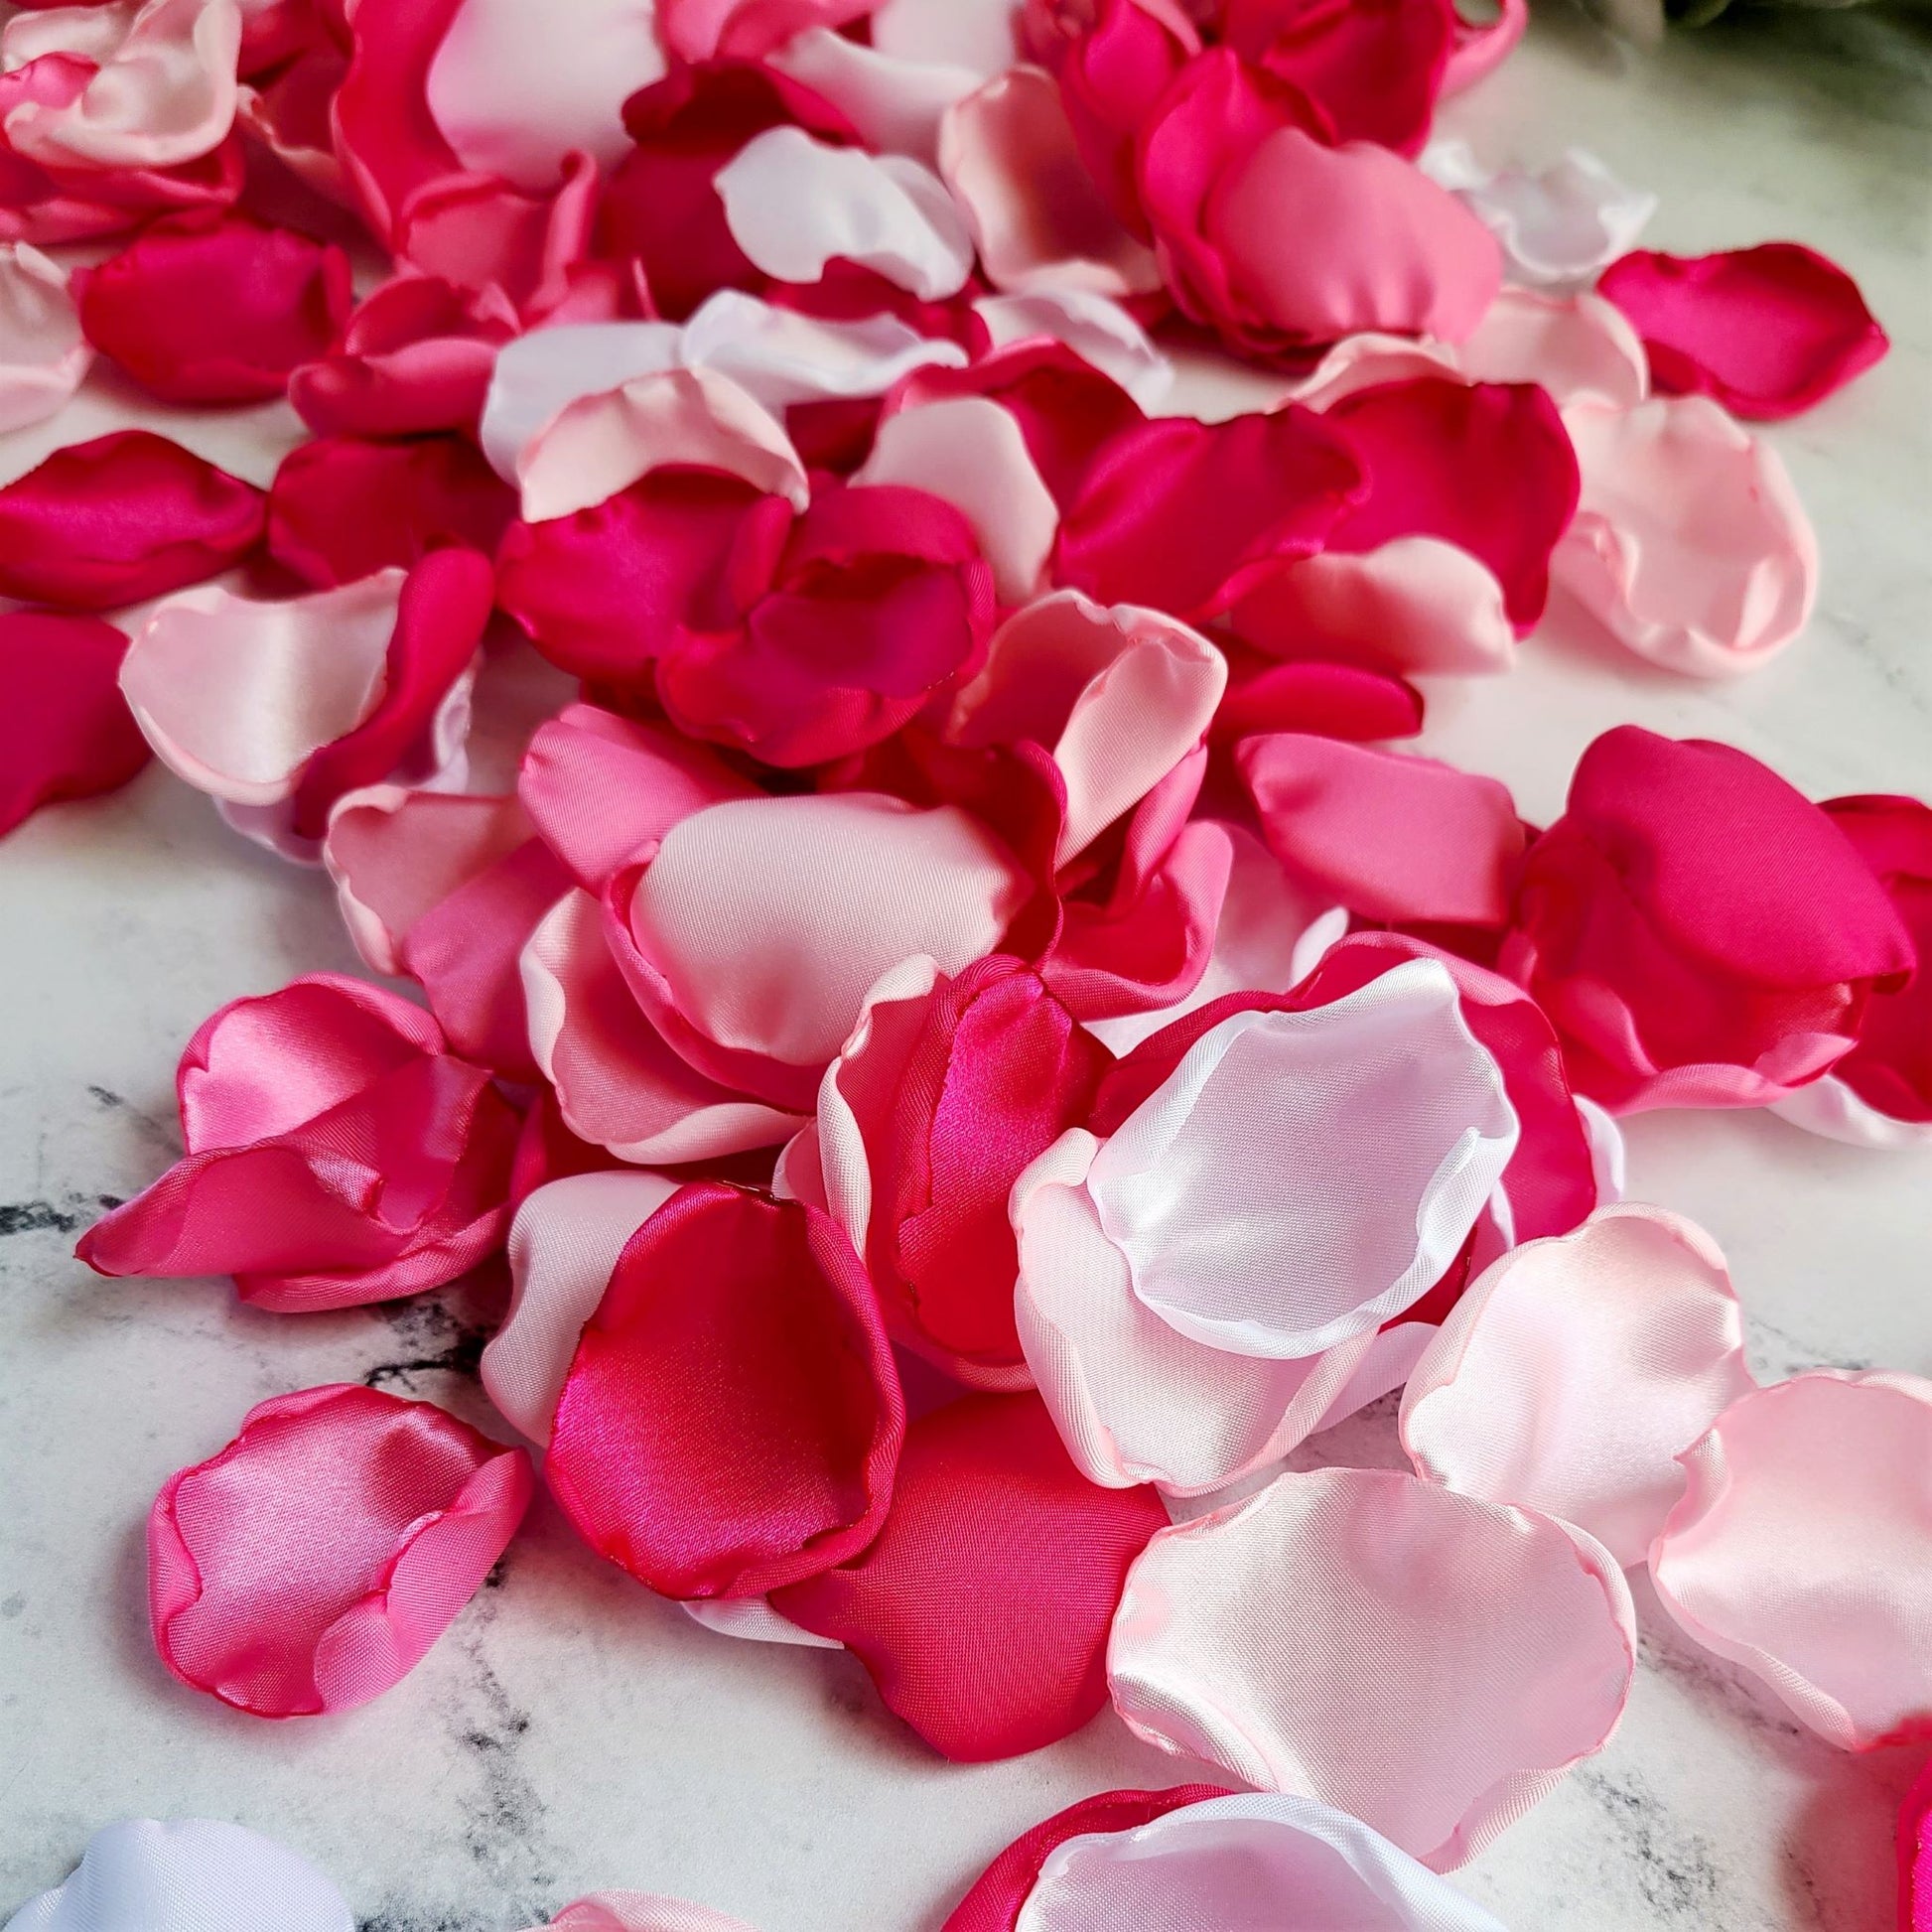 Shades of pink rose petals for barbie core wedding decor